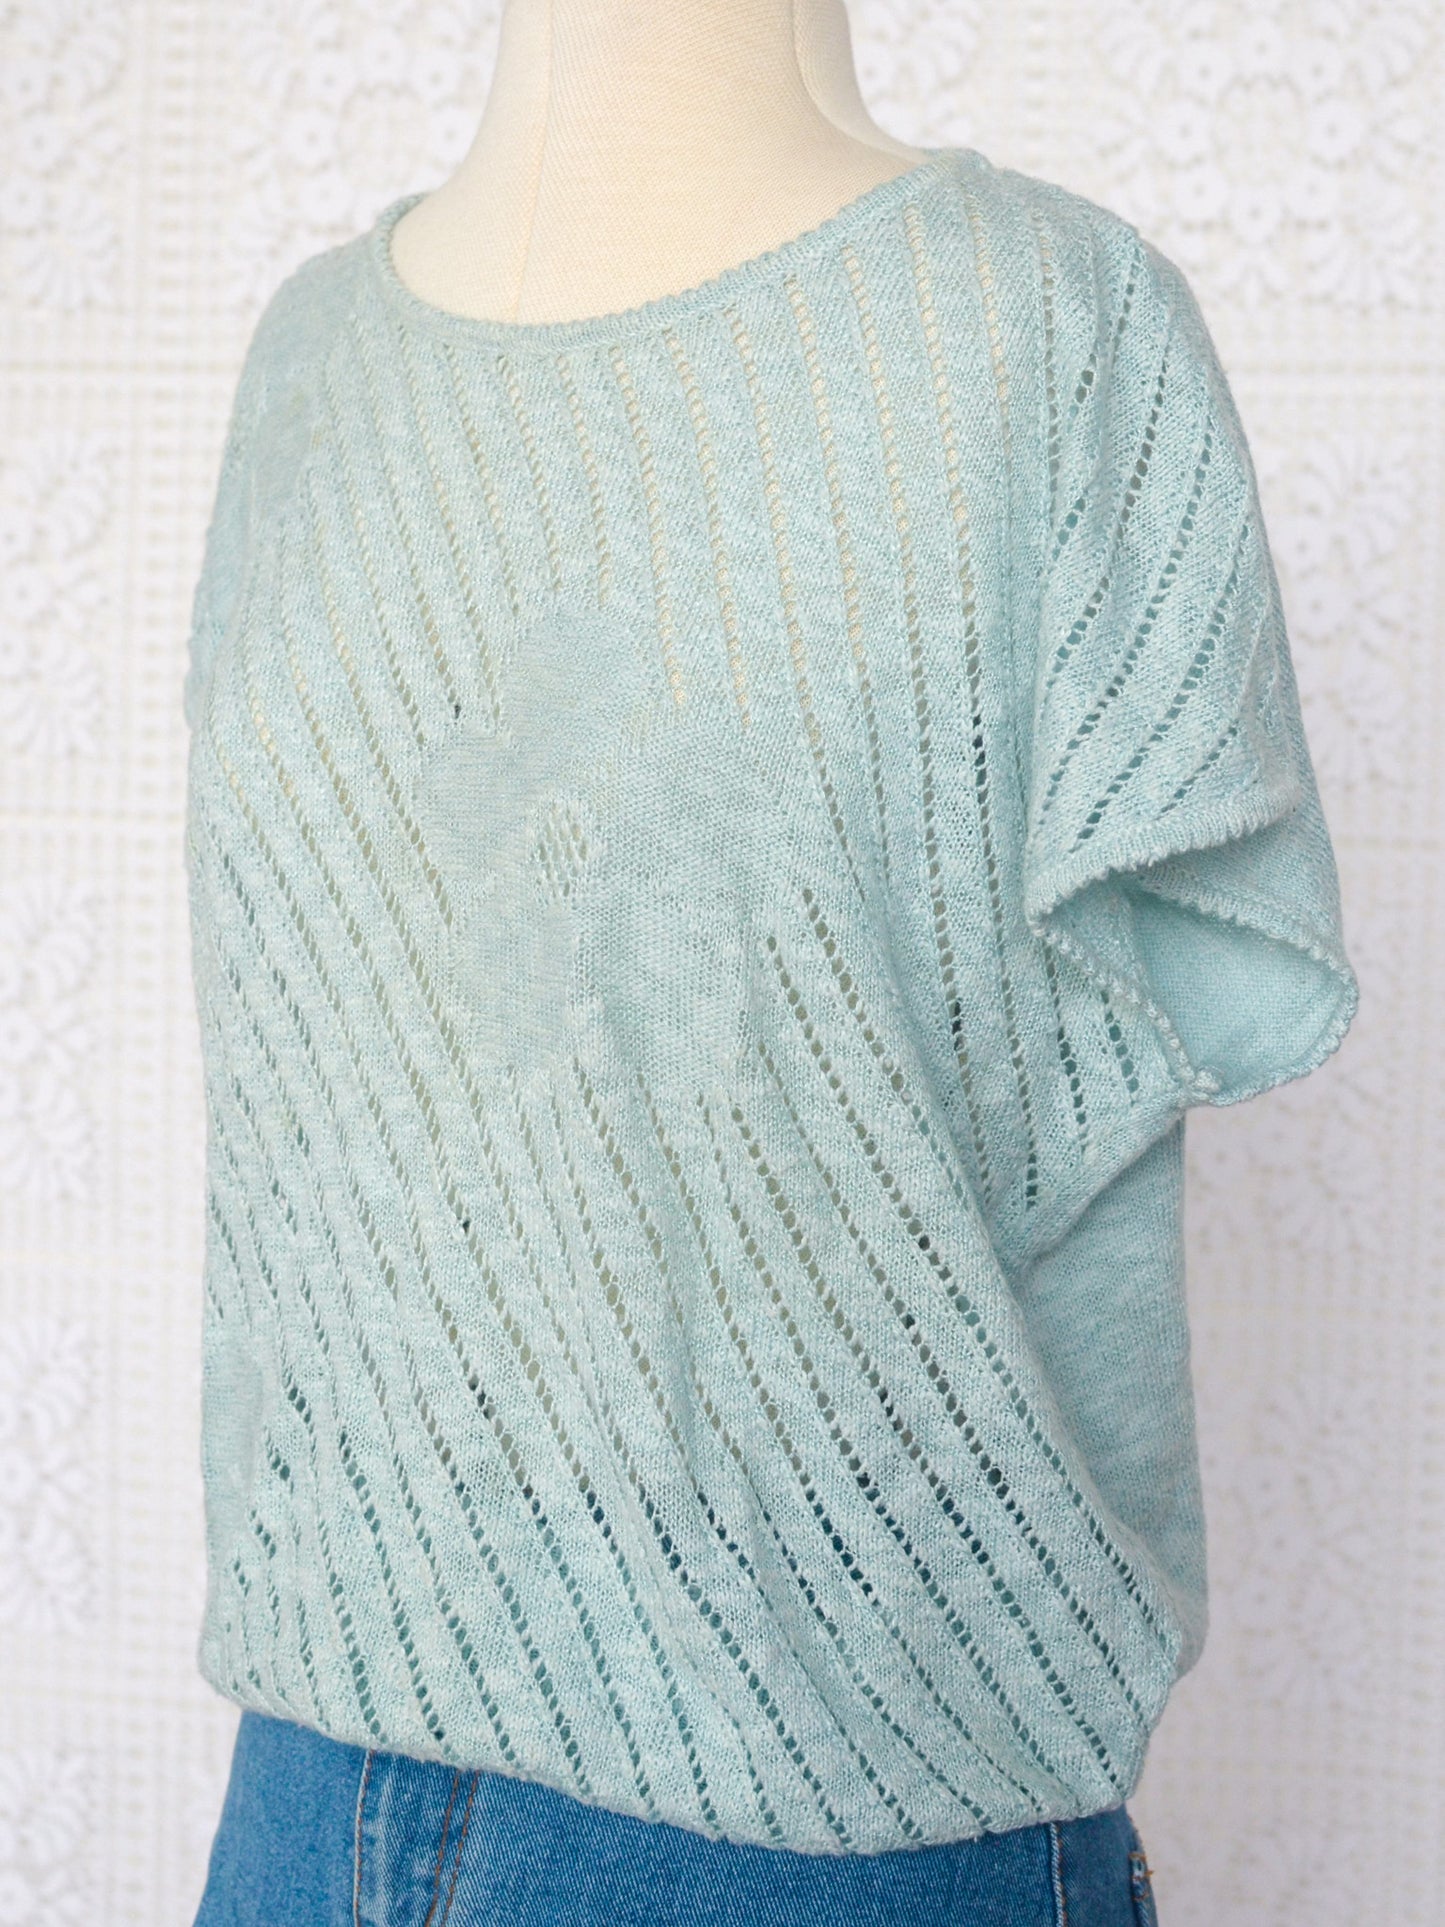 1980s style pale turquoise knitted short sleeve jumper with flower pattern